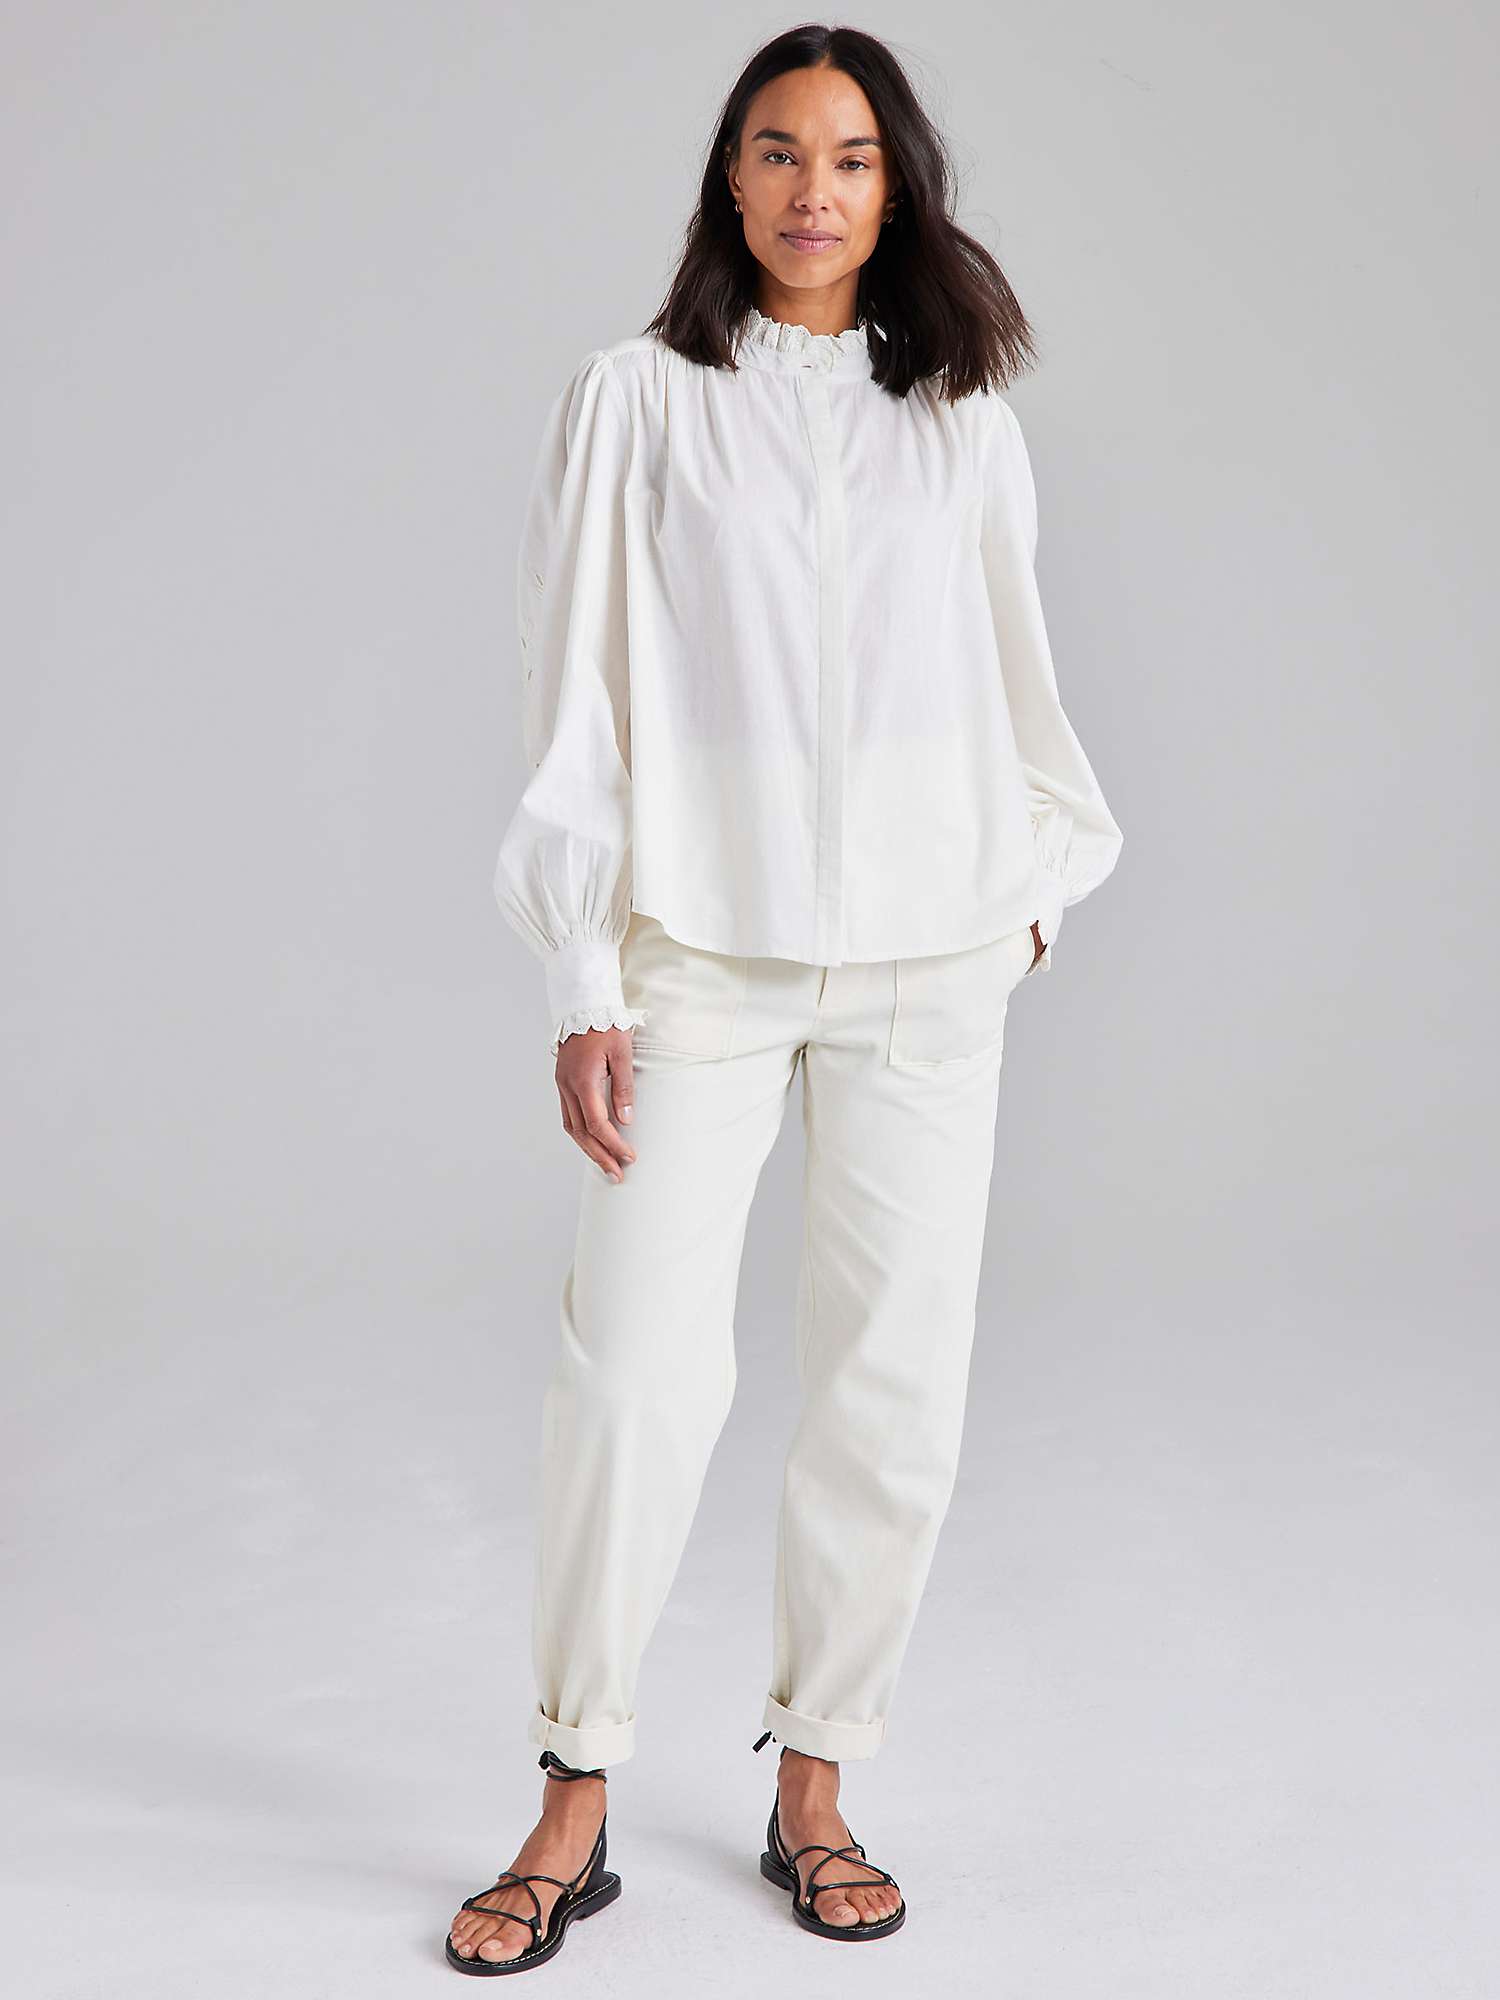 Buy Cape Cove Embroidered Lace Trim Cotton Blouse, White Online at johnlewis.com